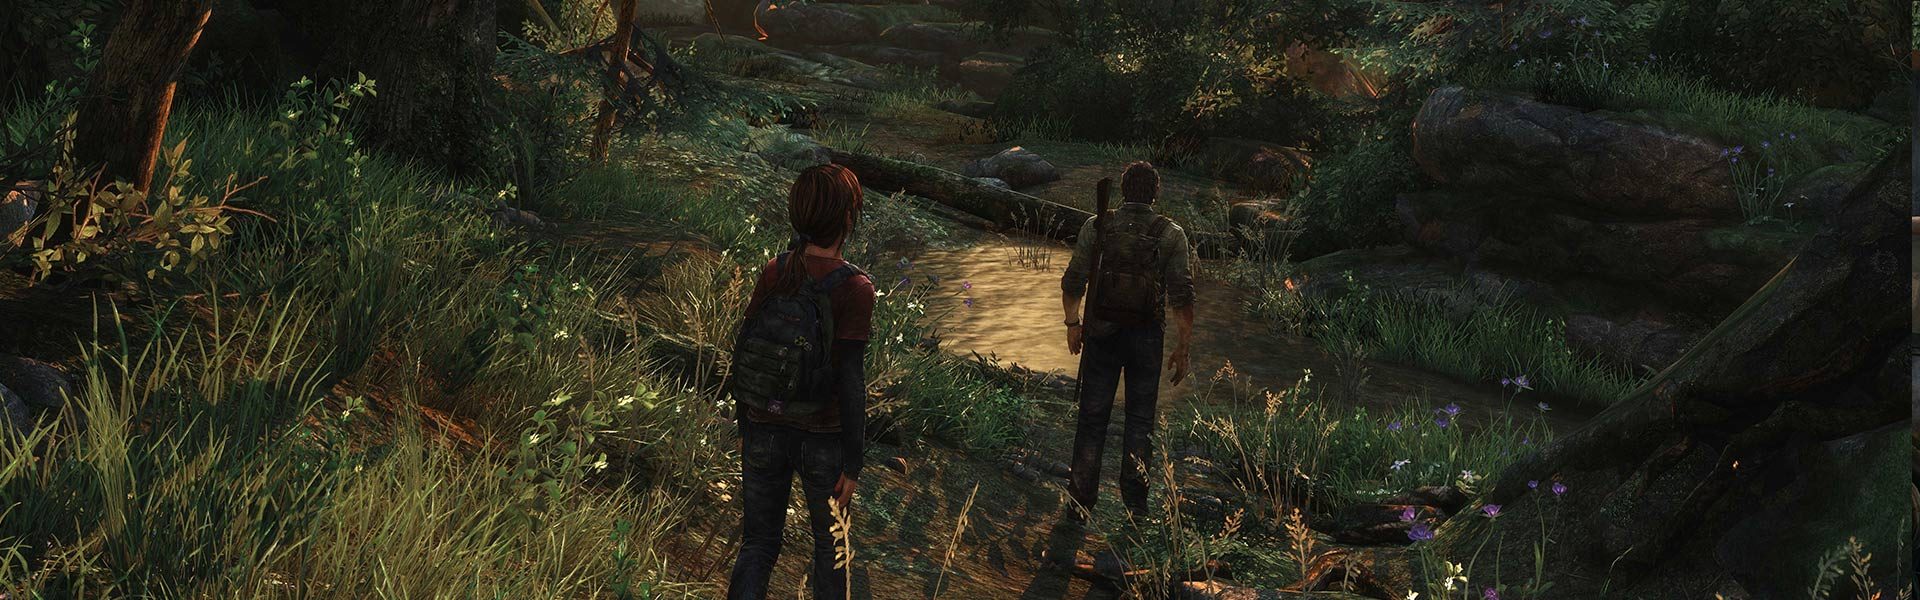 last of us remastered ps4 game